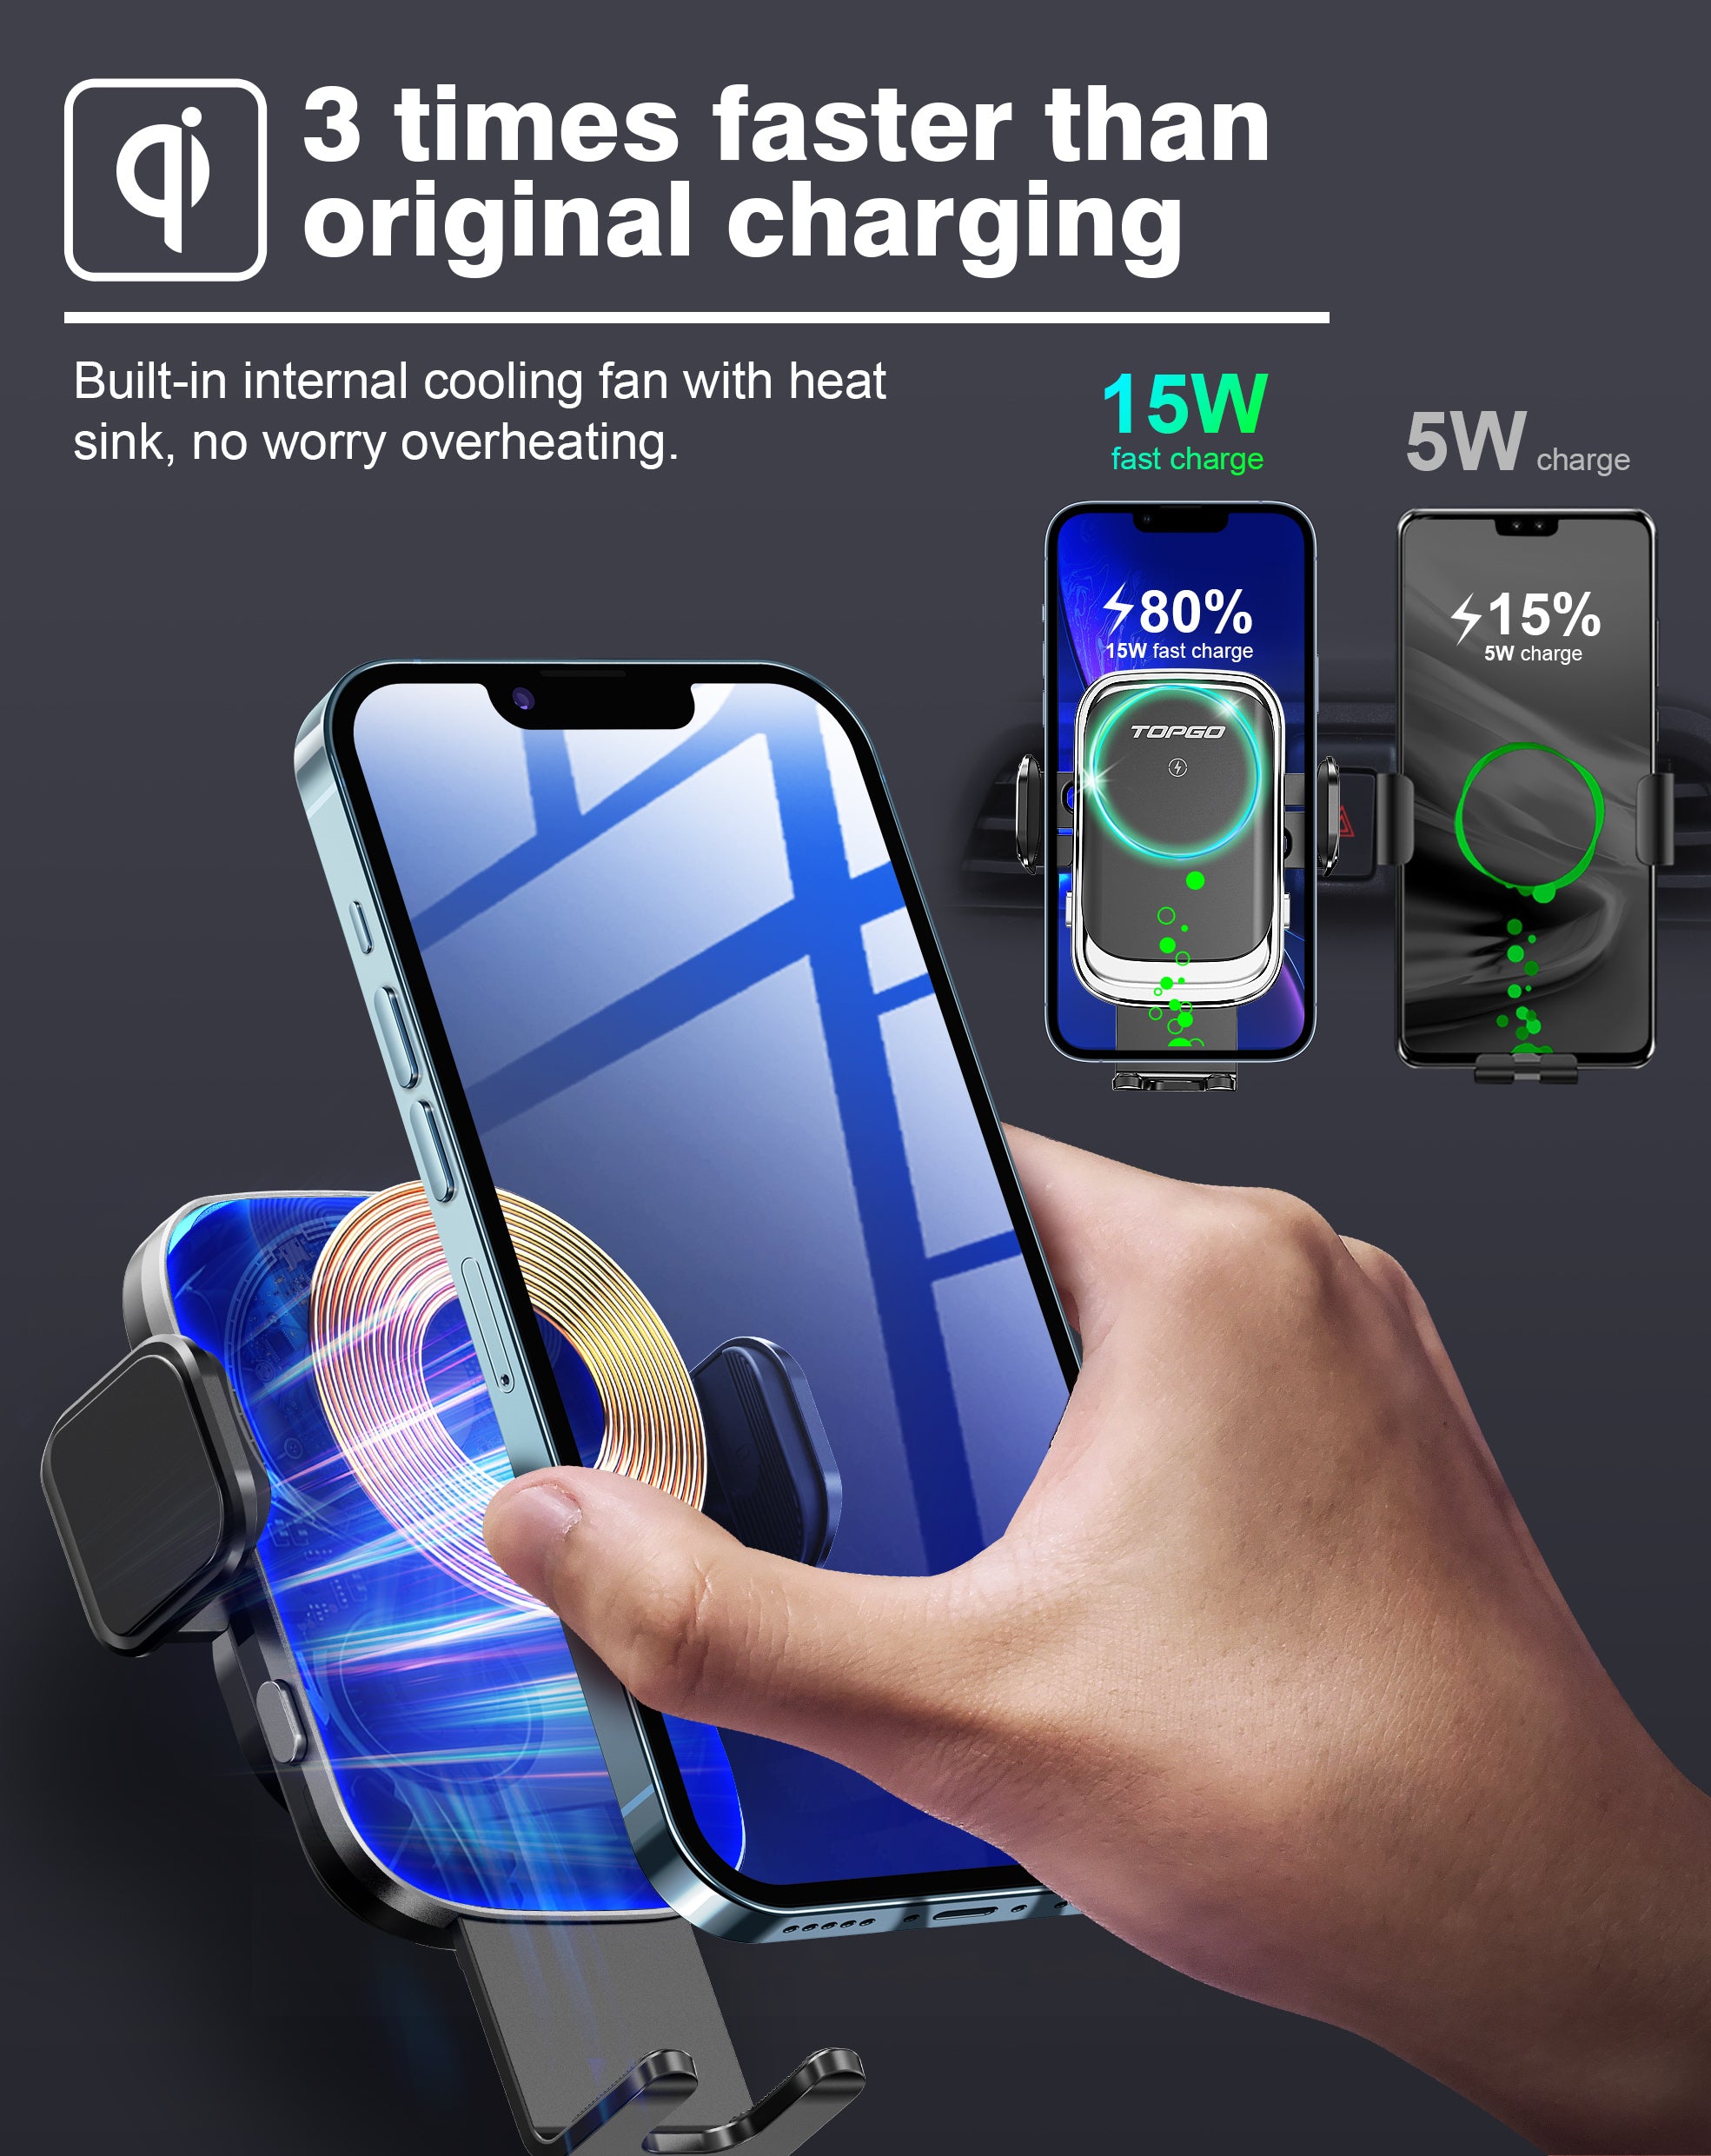 Universal charging cup for inductive charging